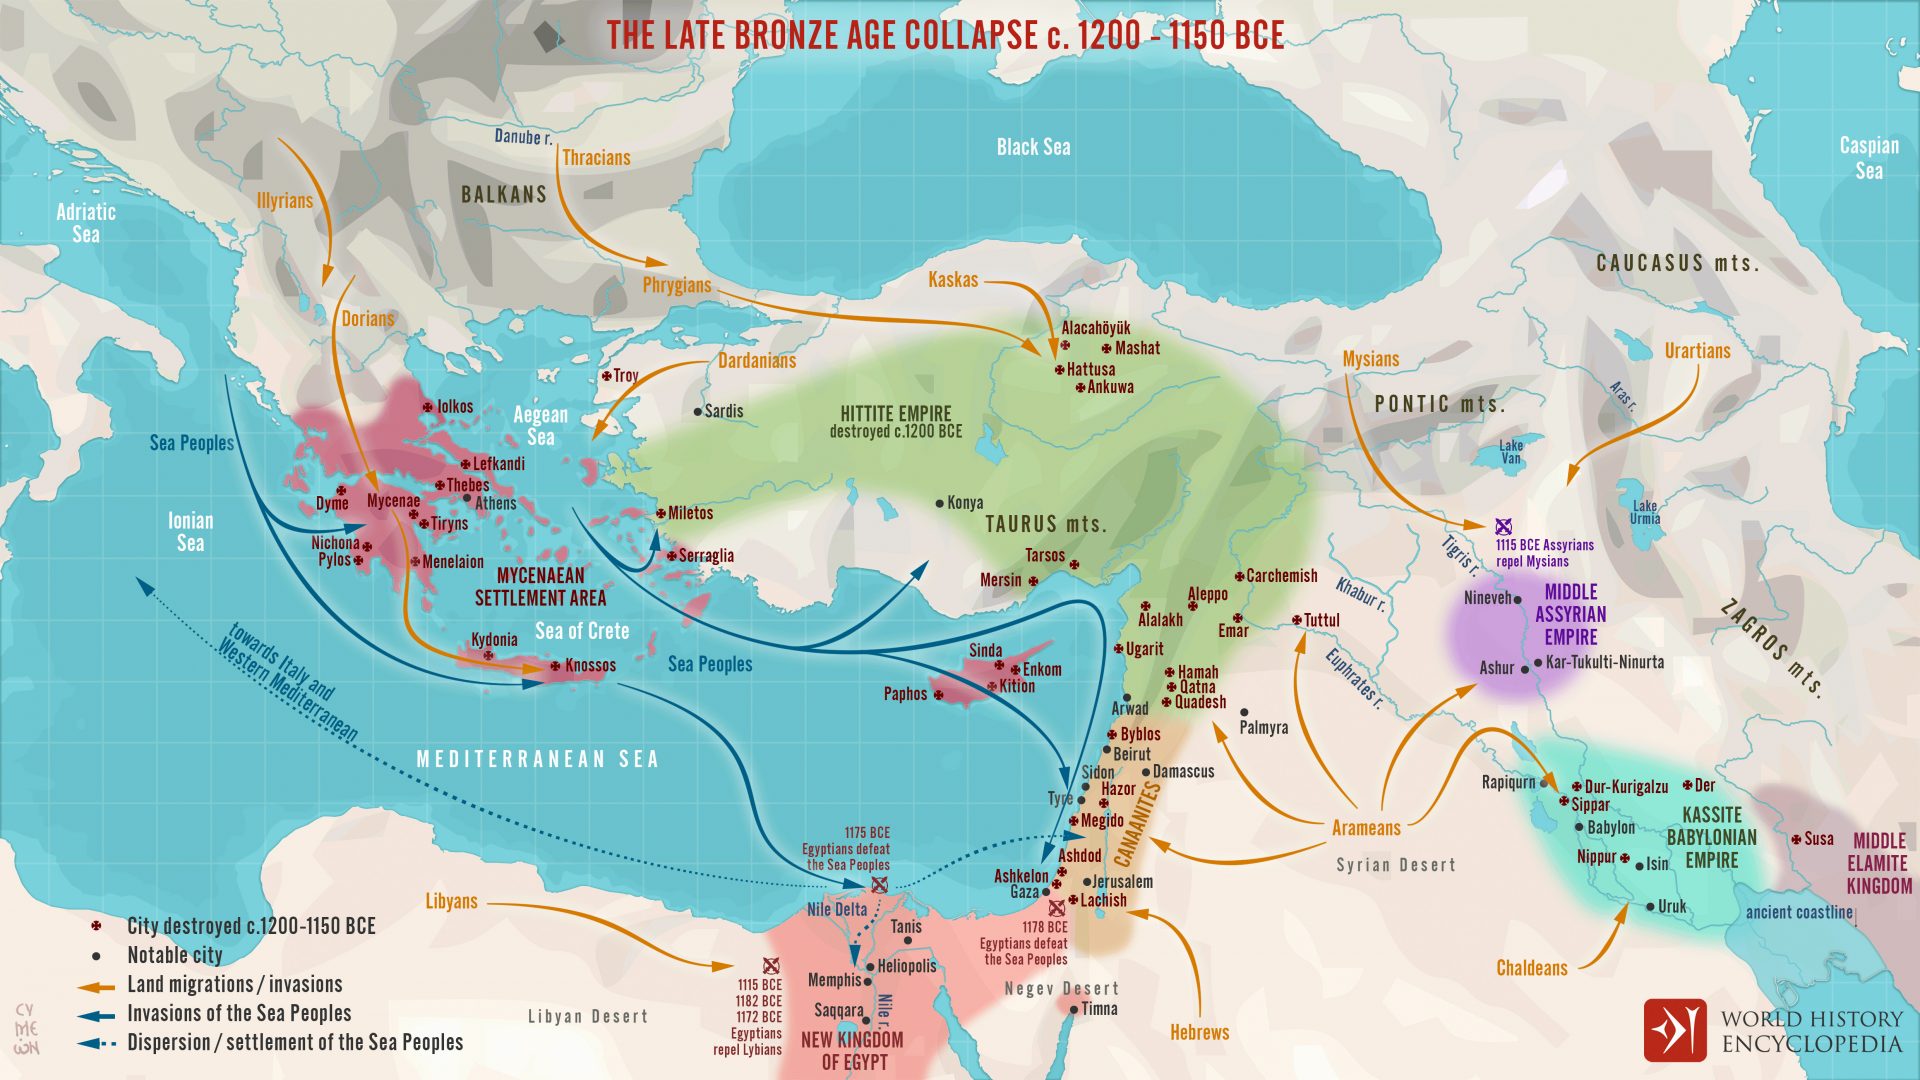 A detailed map titled "THE LATE BRONZE AGE COLLAPSE c. 1200–1150 BCE" depicting the Mediterranean and surrounding regions. The map illustrates city destructions, notable cities, land migrations/invasions, invasions of the Sea Peoples, and their subsequent dispersion. Major civilizations like the Mycenaean, Hittite Empire, and Middle Assyrian Empire are highlighted. Notable cities like Athens, Troy, Nineveh, and Memphis are marked. The map also shows the routes taken by various groups, such as the Sea Peoples, Dorians, and Mysians, with different colored arrows. The paths of the Sea Peoples' invasions into Egypt are also highlighted.